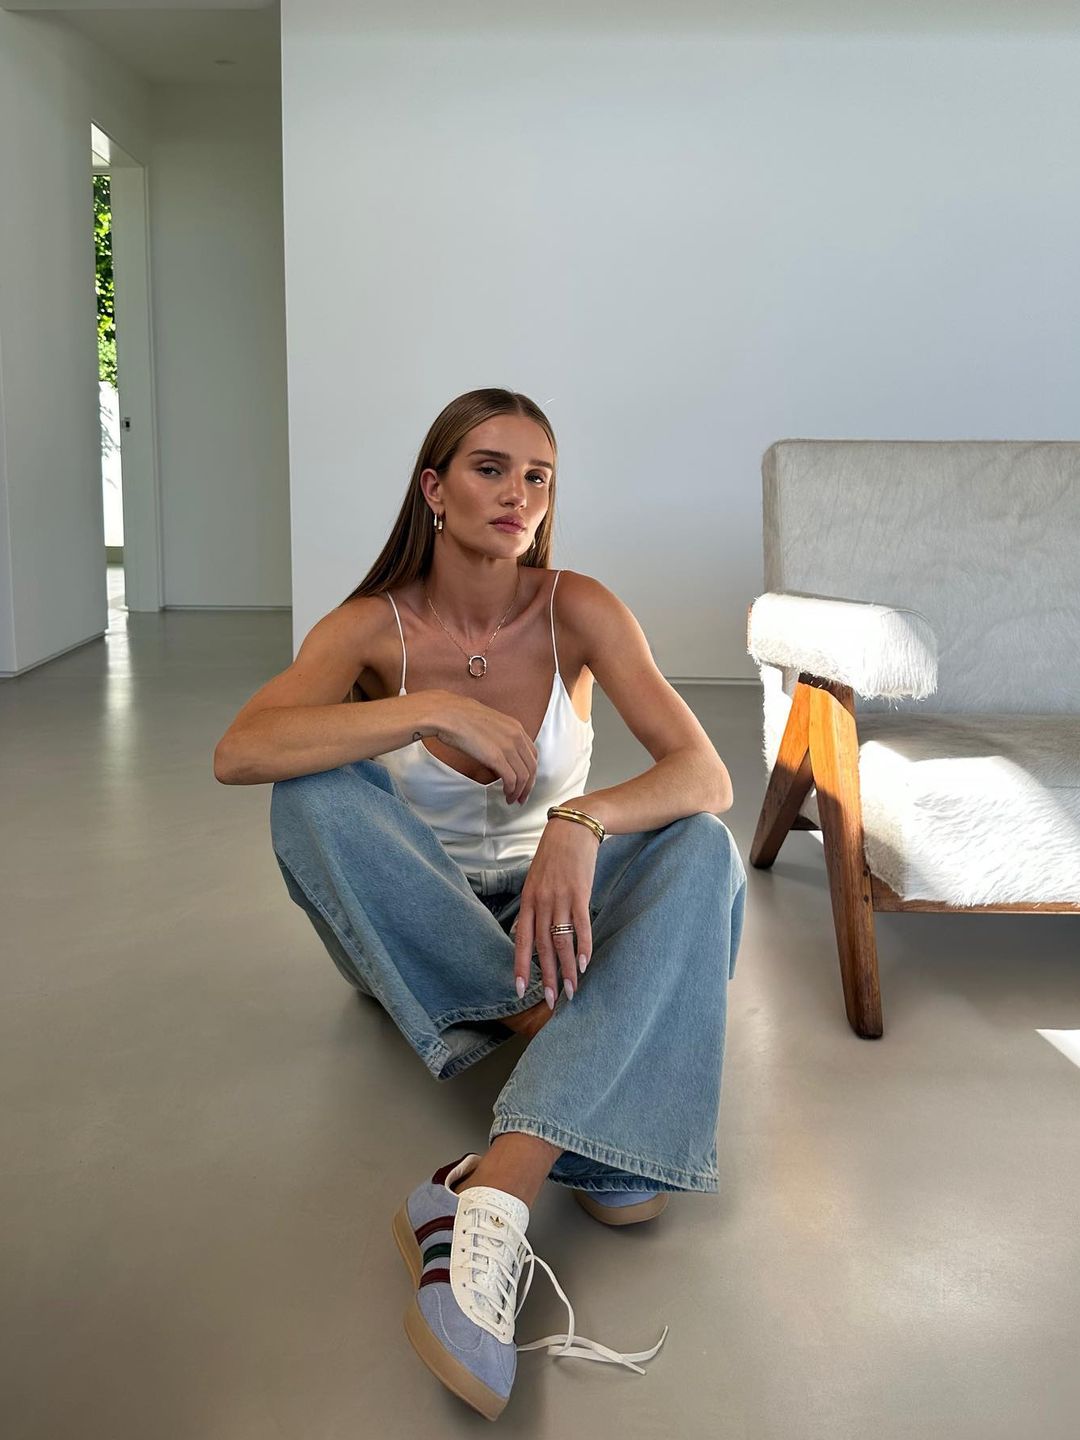 Rosie Huntington Whiteley poses for a Instagram photo in blue jeans, a white cami and blue sneakers